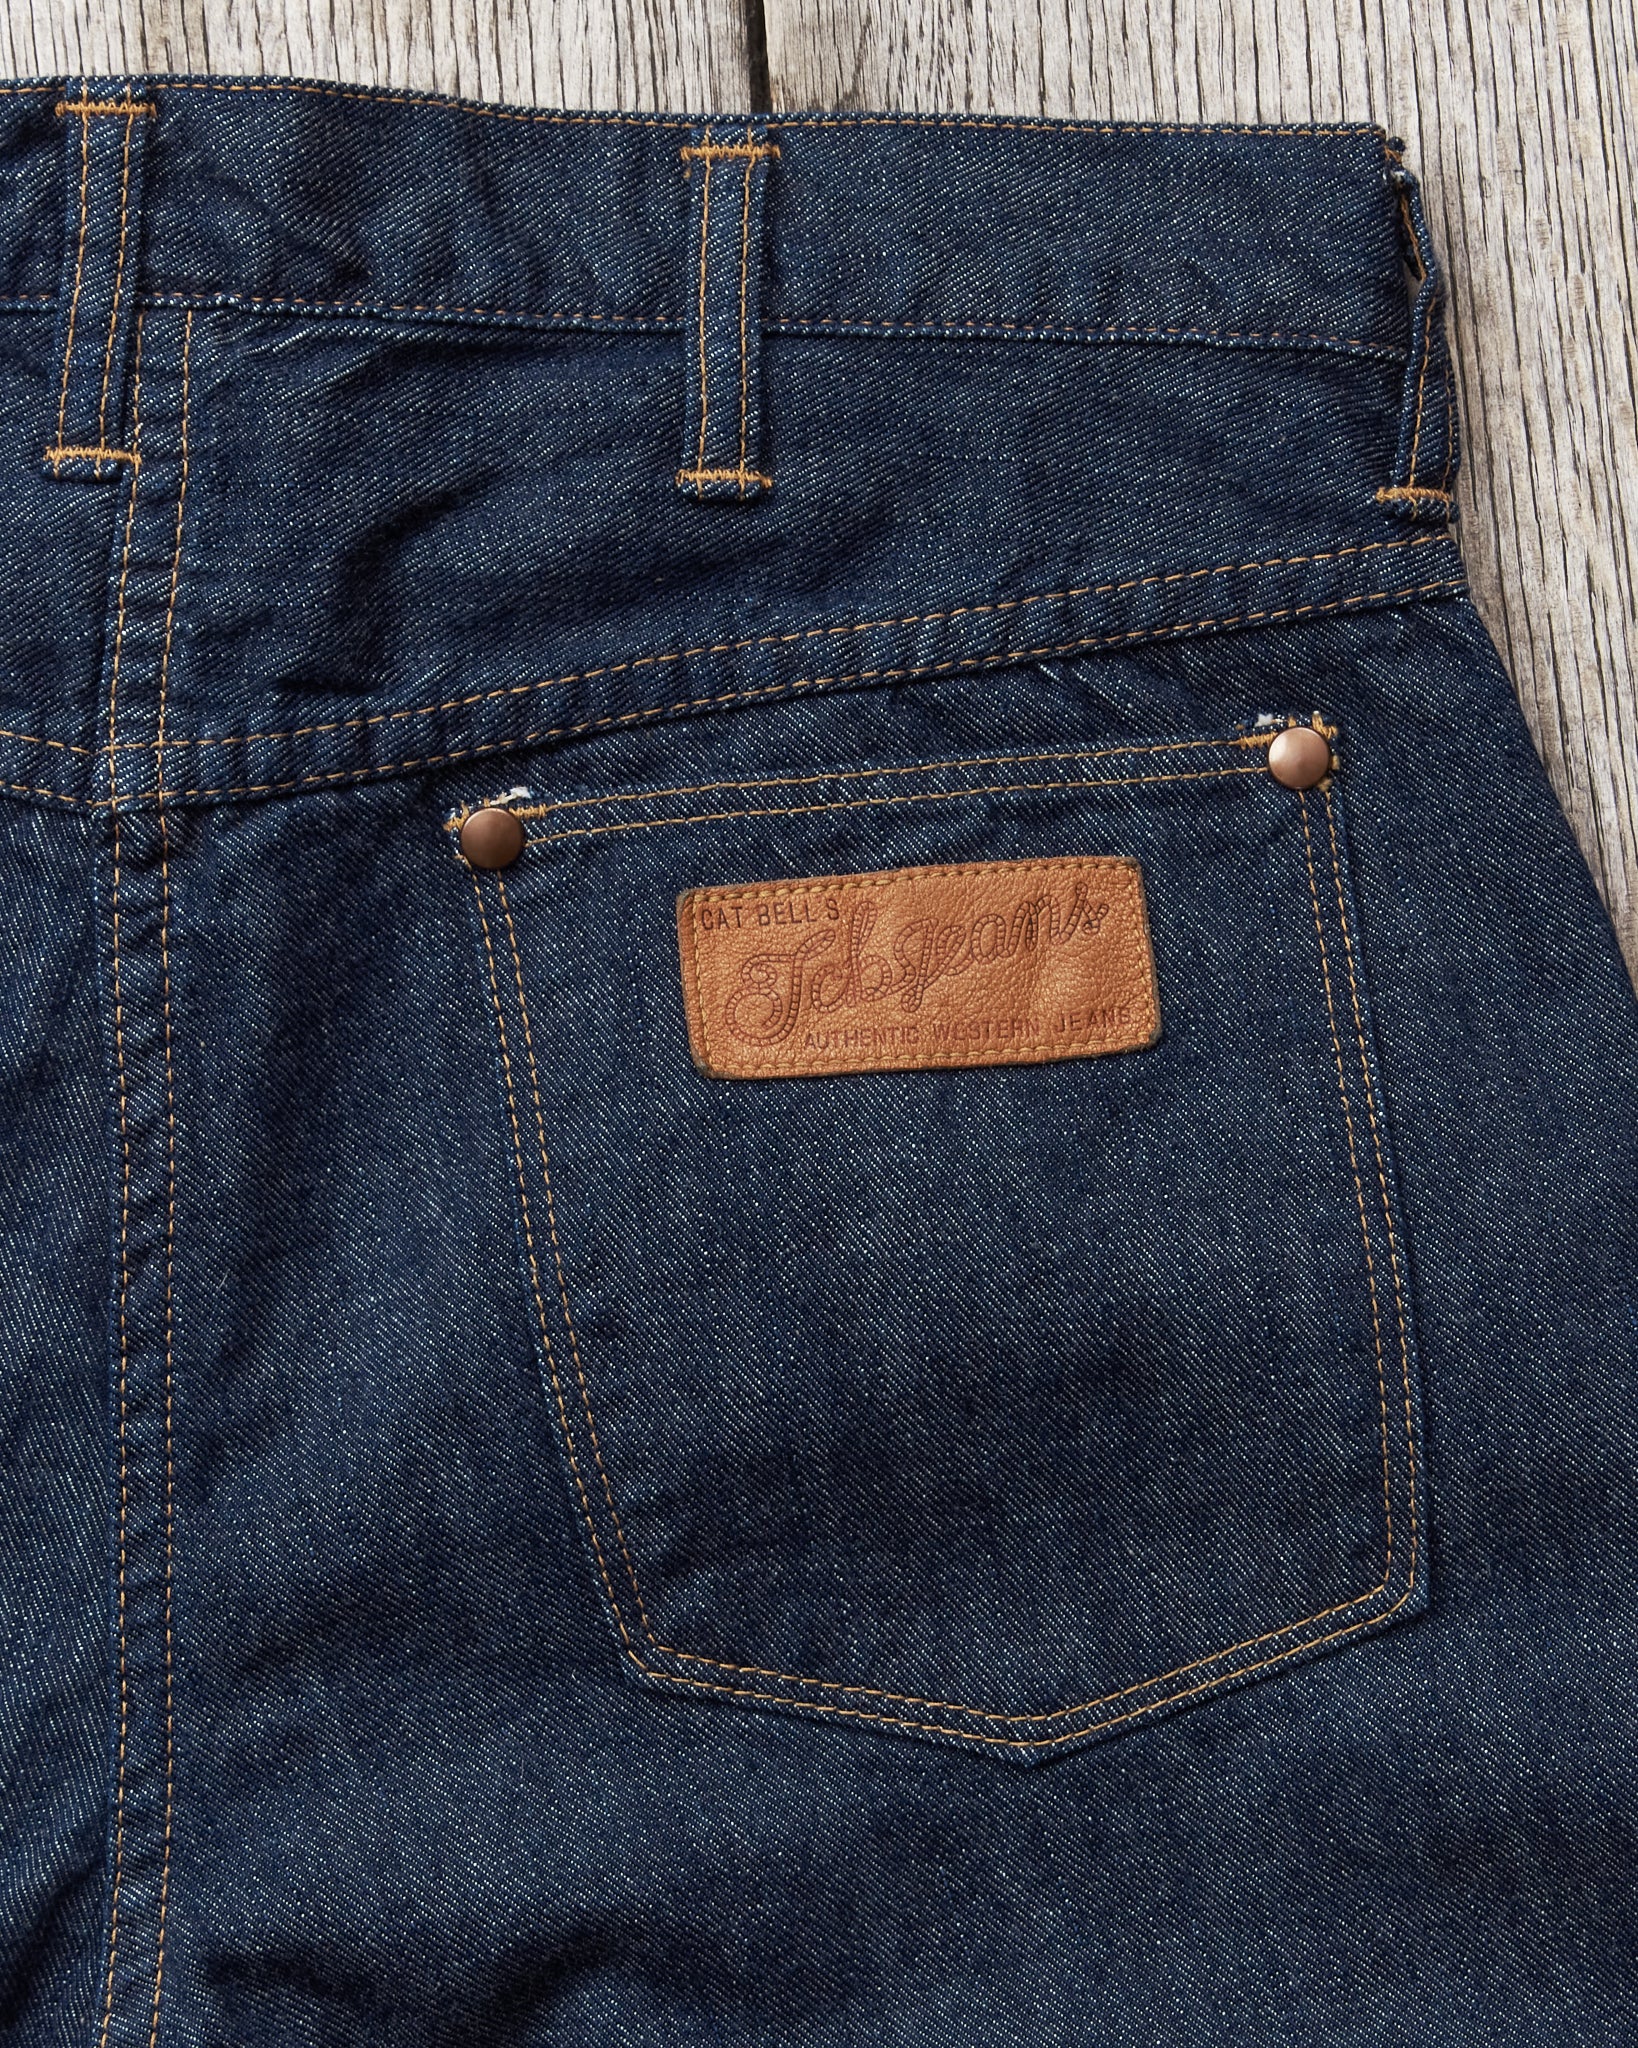 TCB Jeans Working Cat Hero Jeans – Second Sunrise